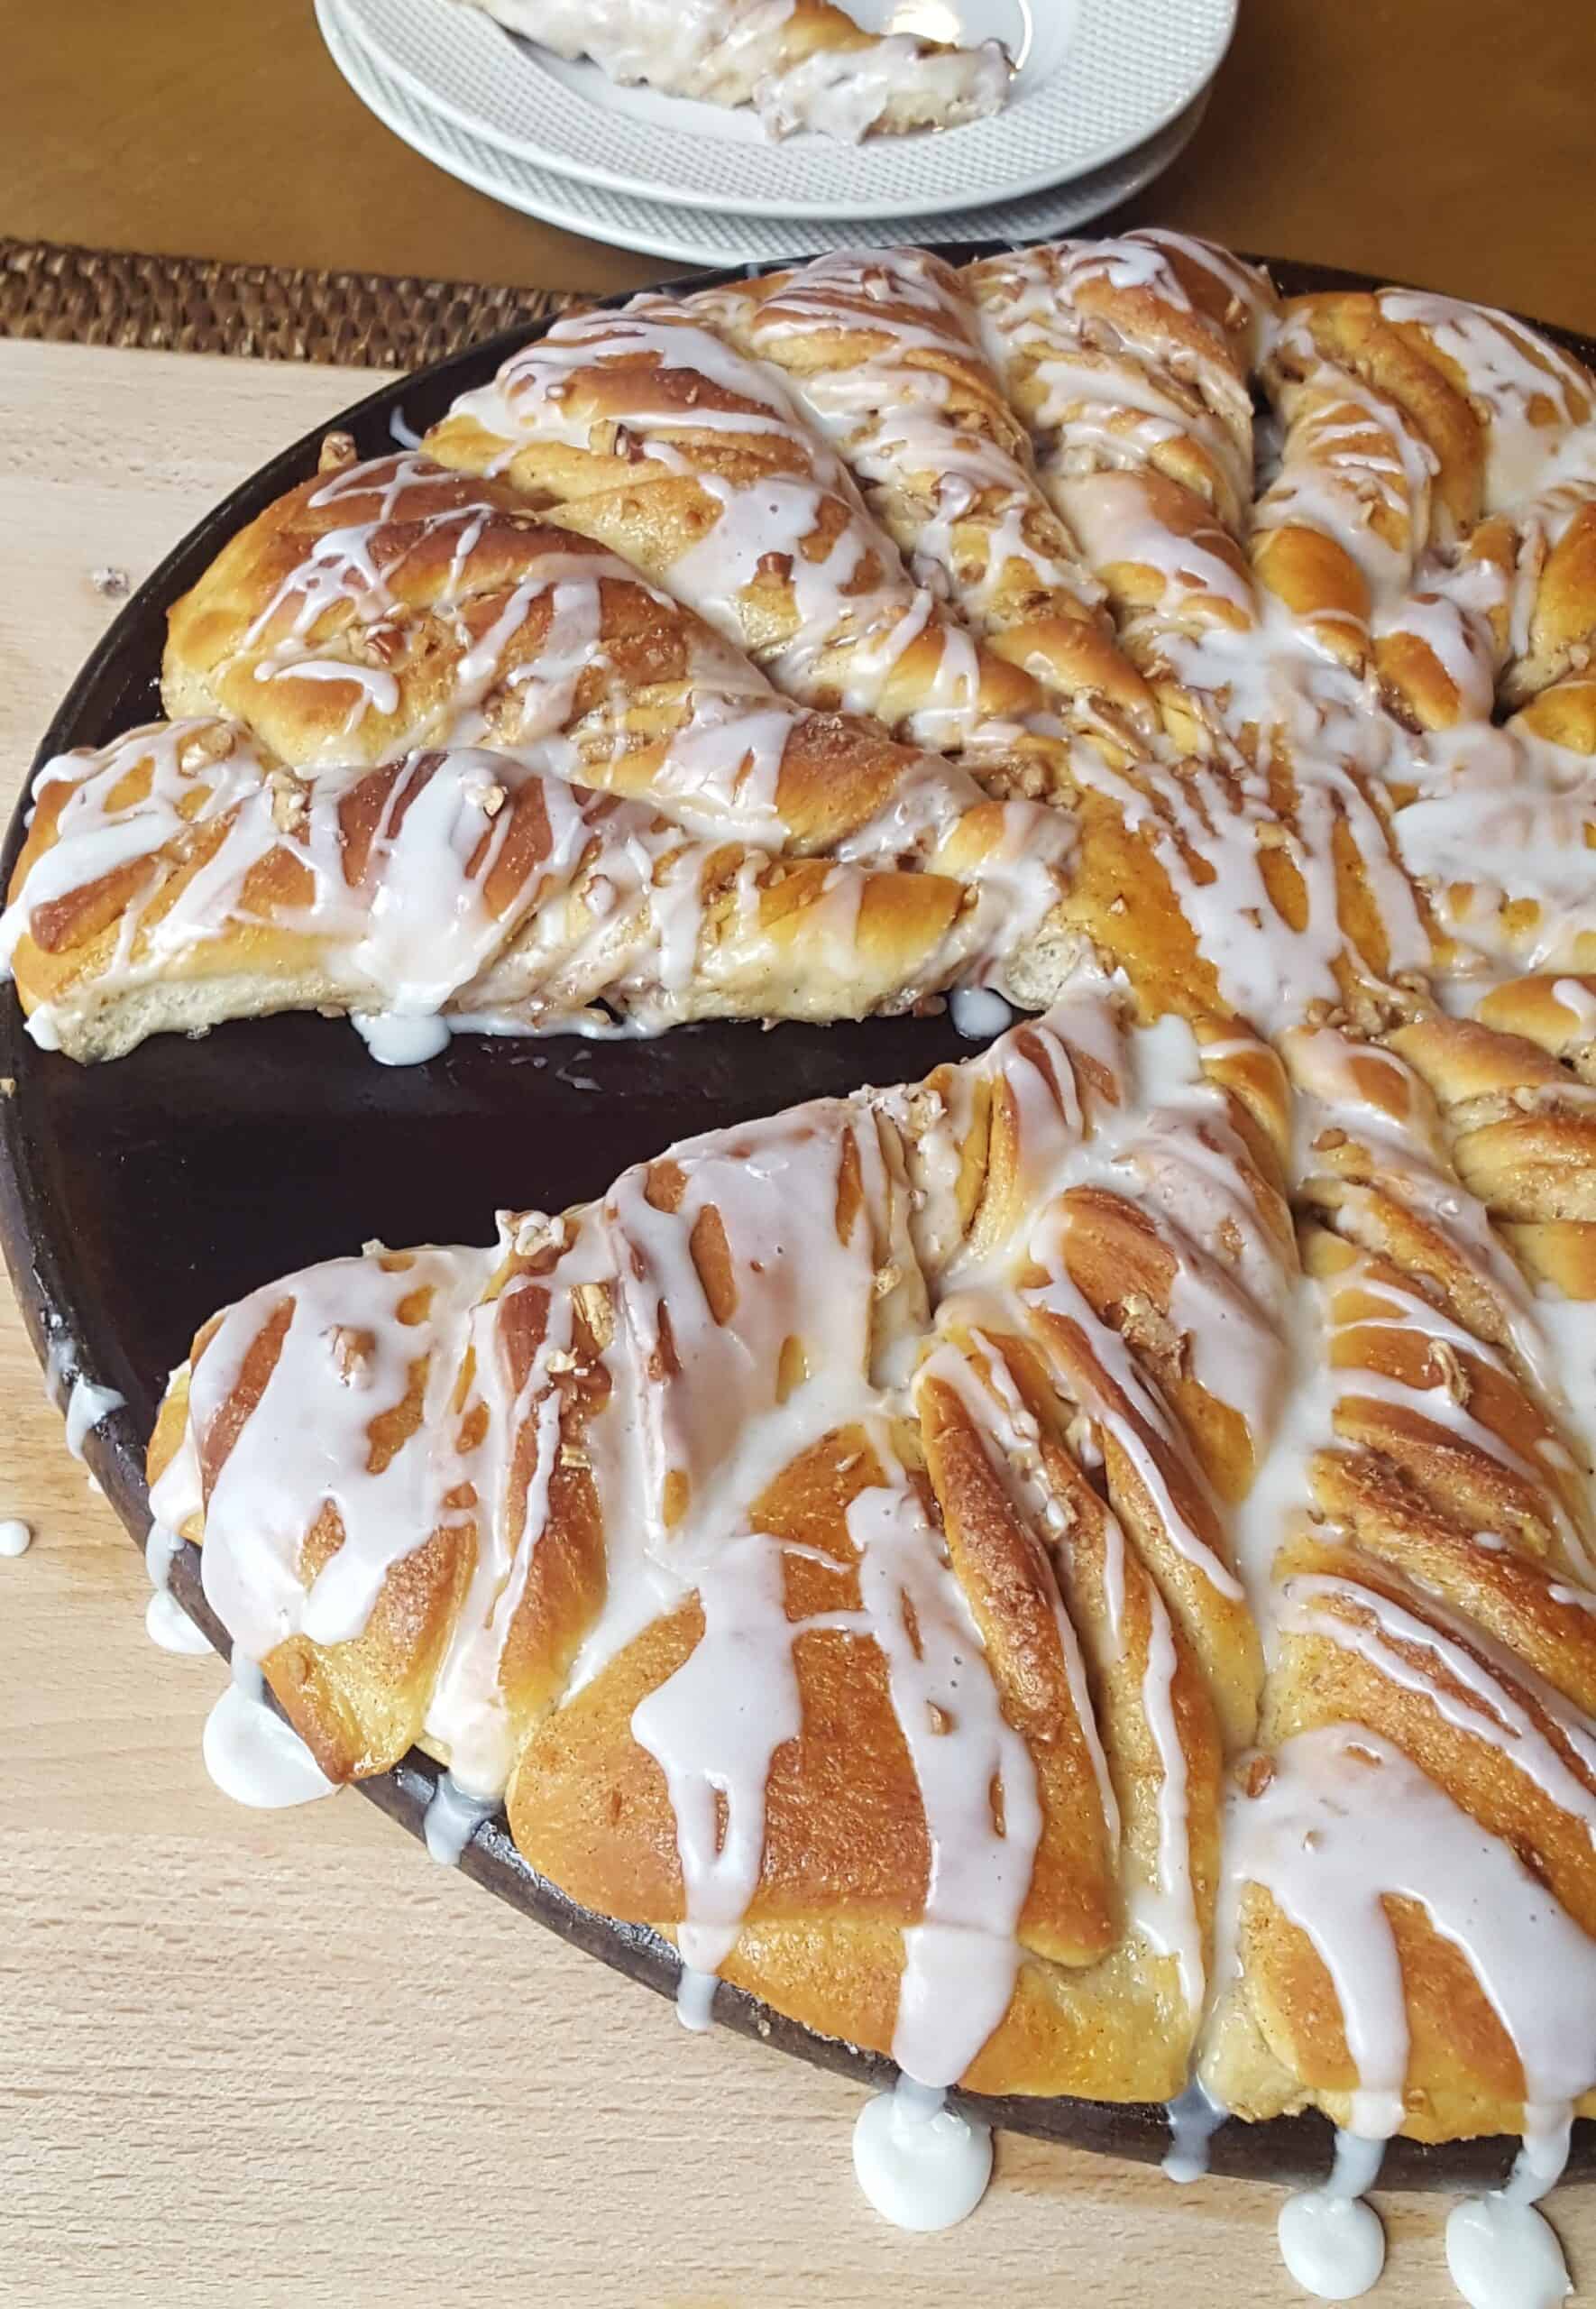 Maple Pecan Coffeecake Twists. A shortcut recipe for the 1969 20th Annual Pillsbury Bakeoff bookazine. Drizzled with plenty of icing.